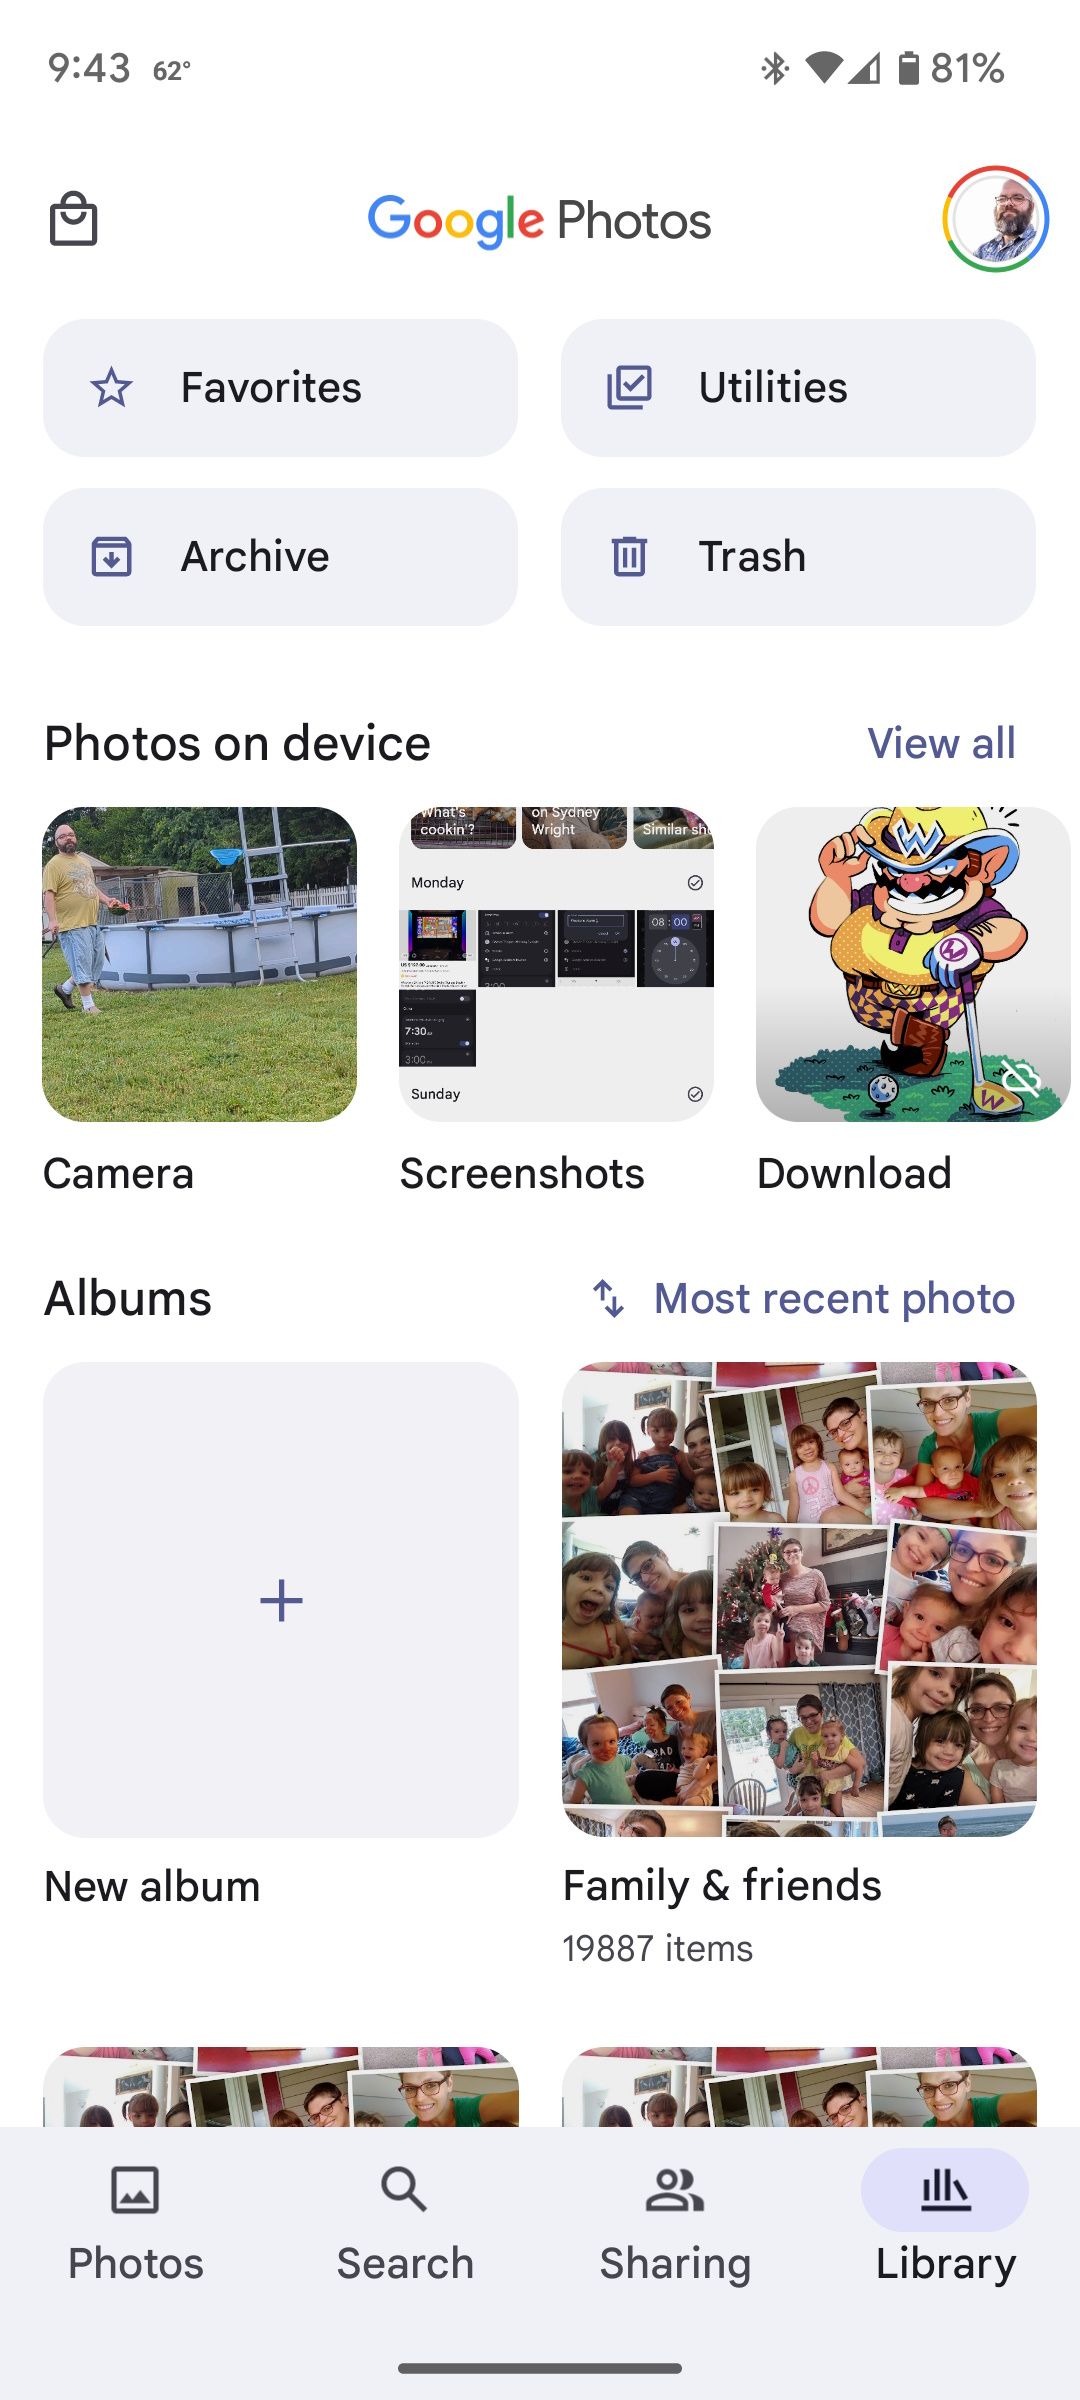 The Photos section in the Google Photos app on Android